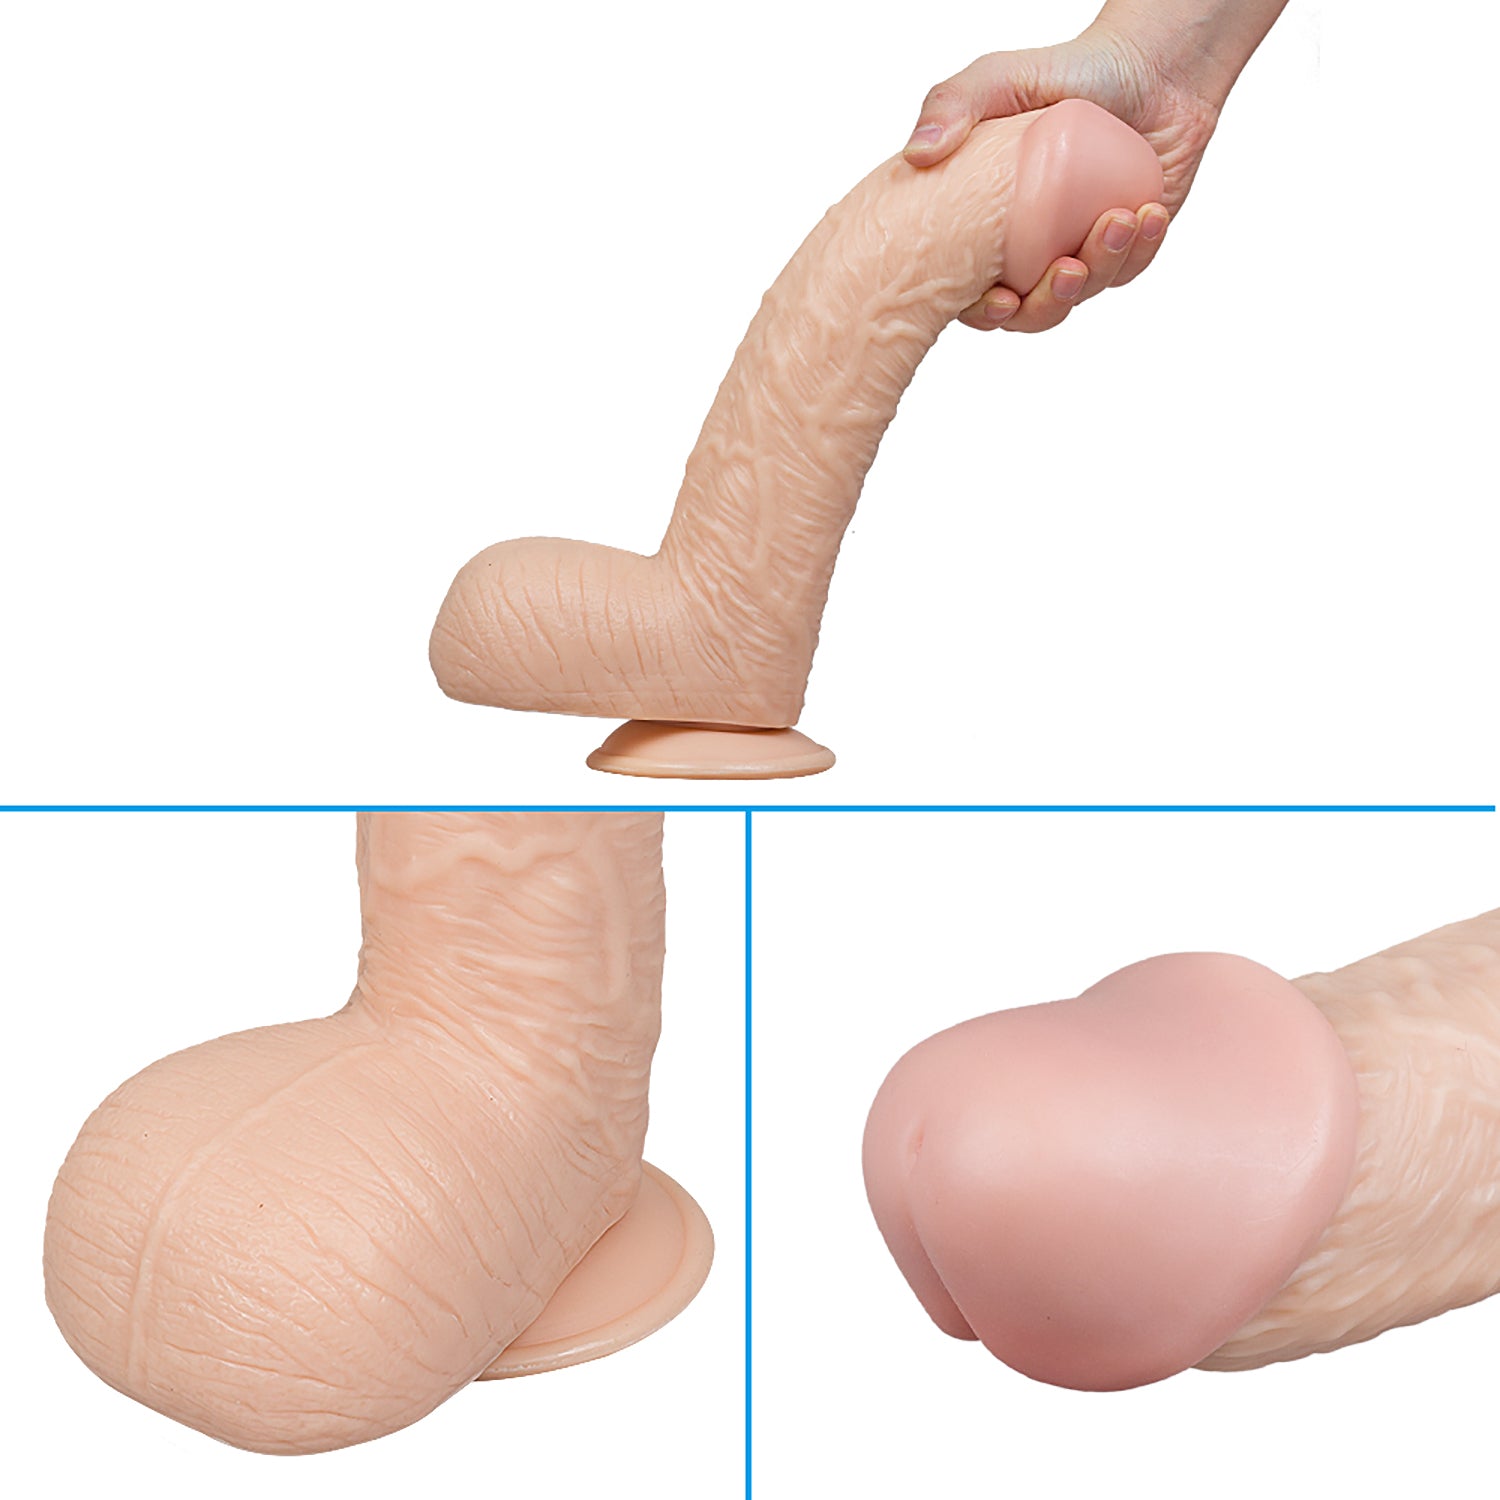 MD 11.4" King Size GIANT Realistic Dildo